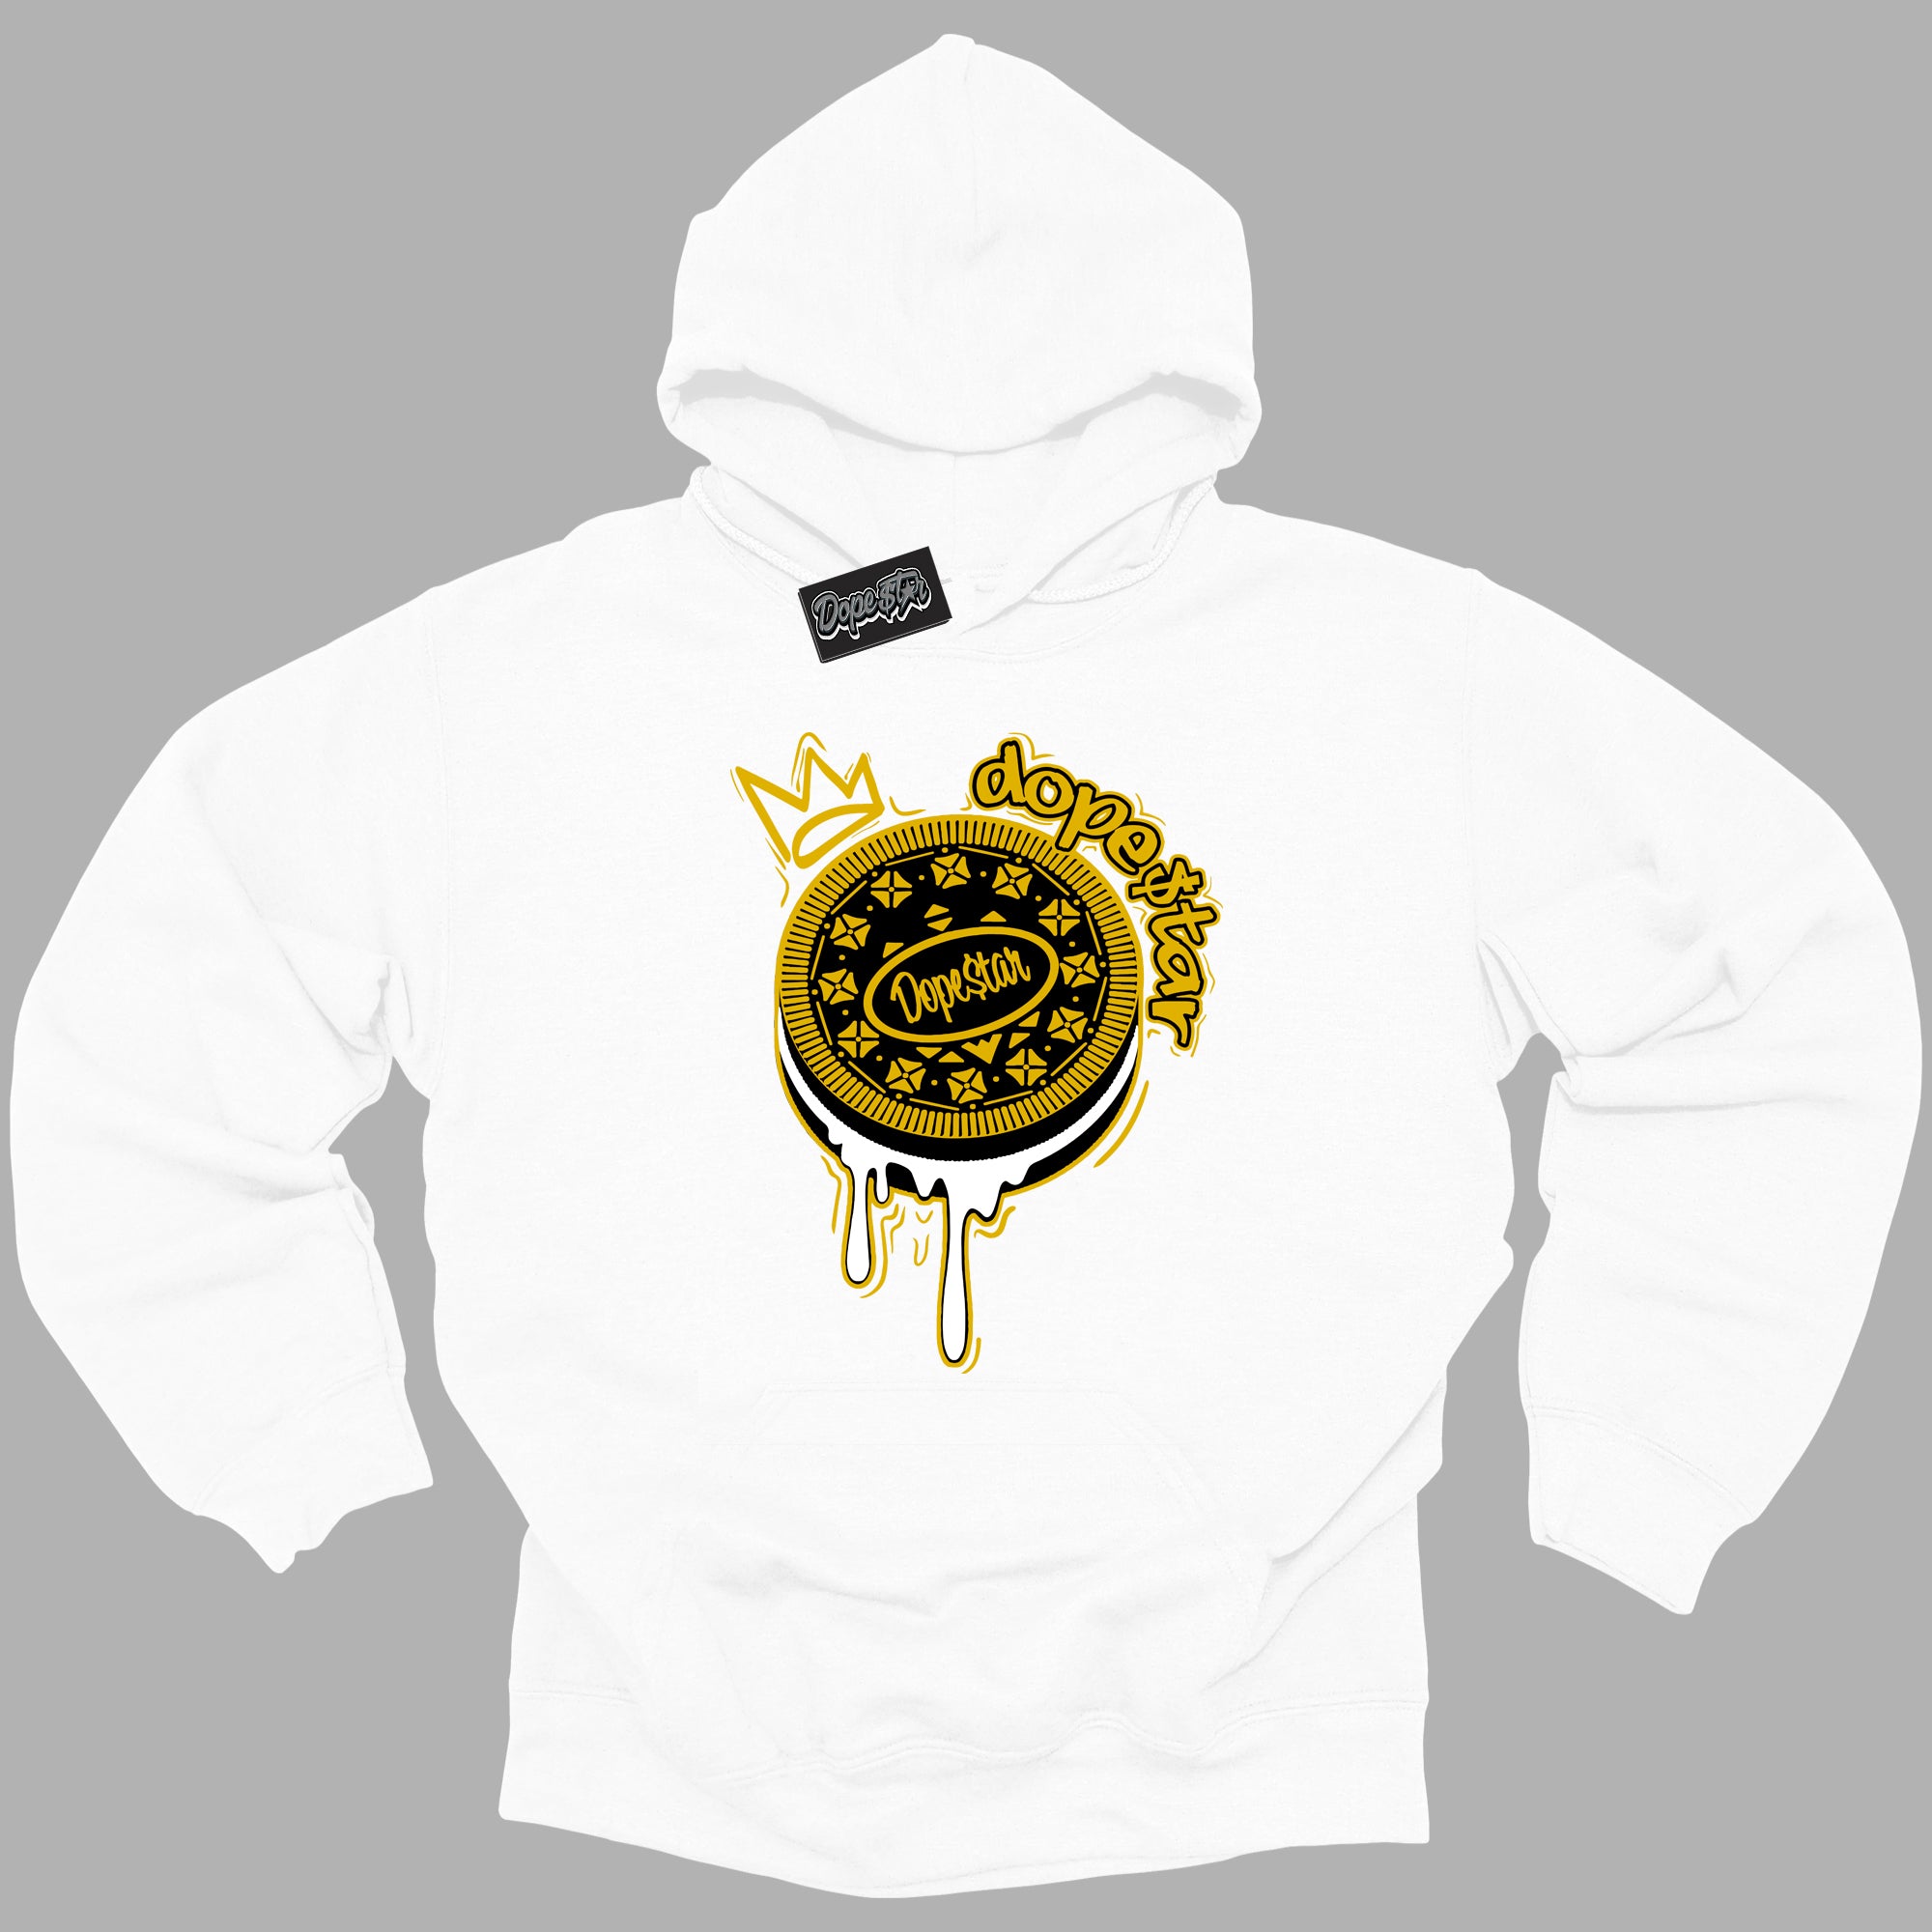 Cool White Hoodie with “ Oreo DS ”  design that Perfectly Matches Yellow Ochre 6s Sneakers.